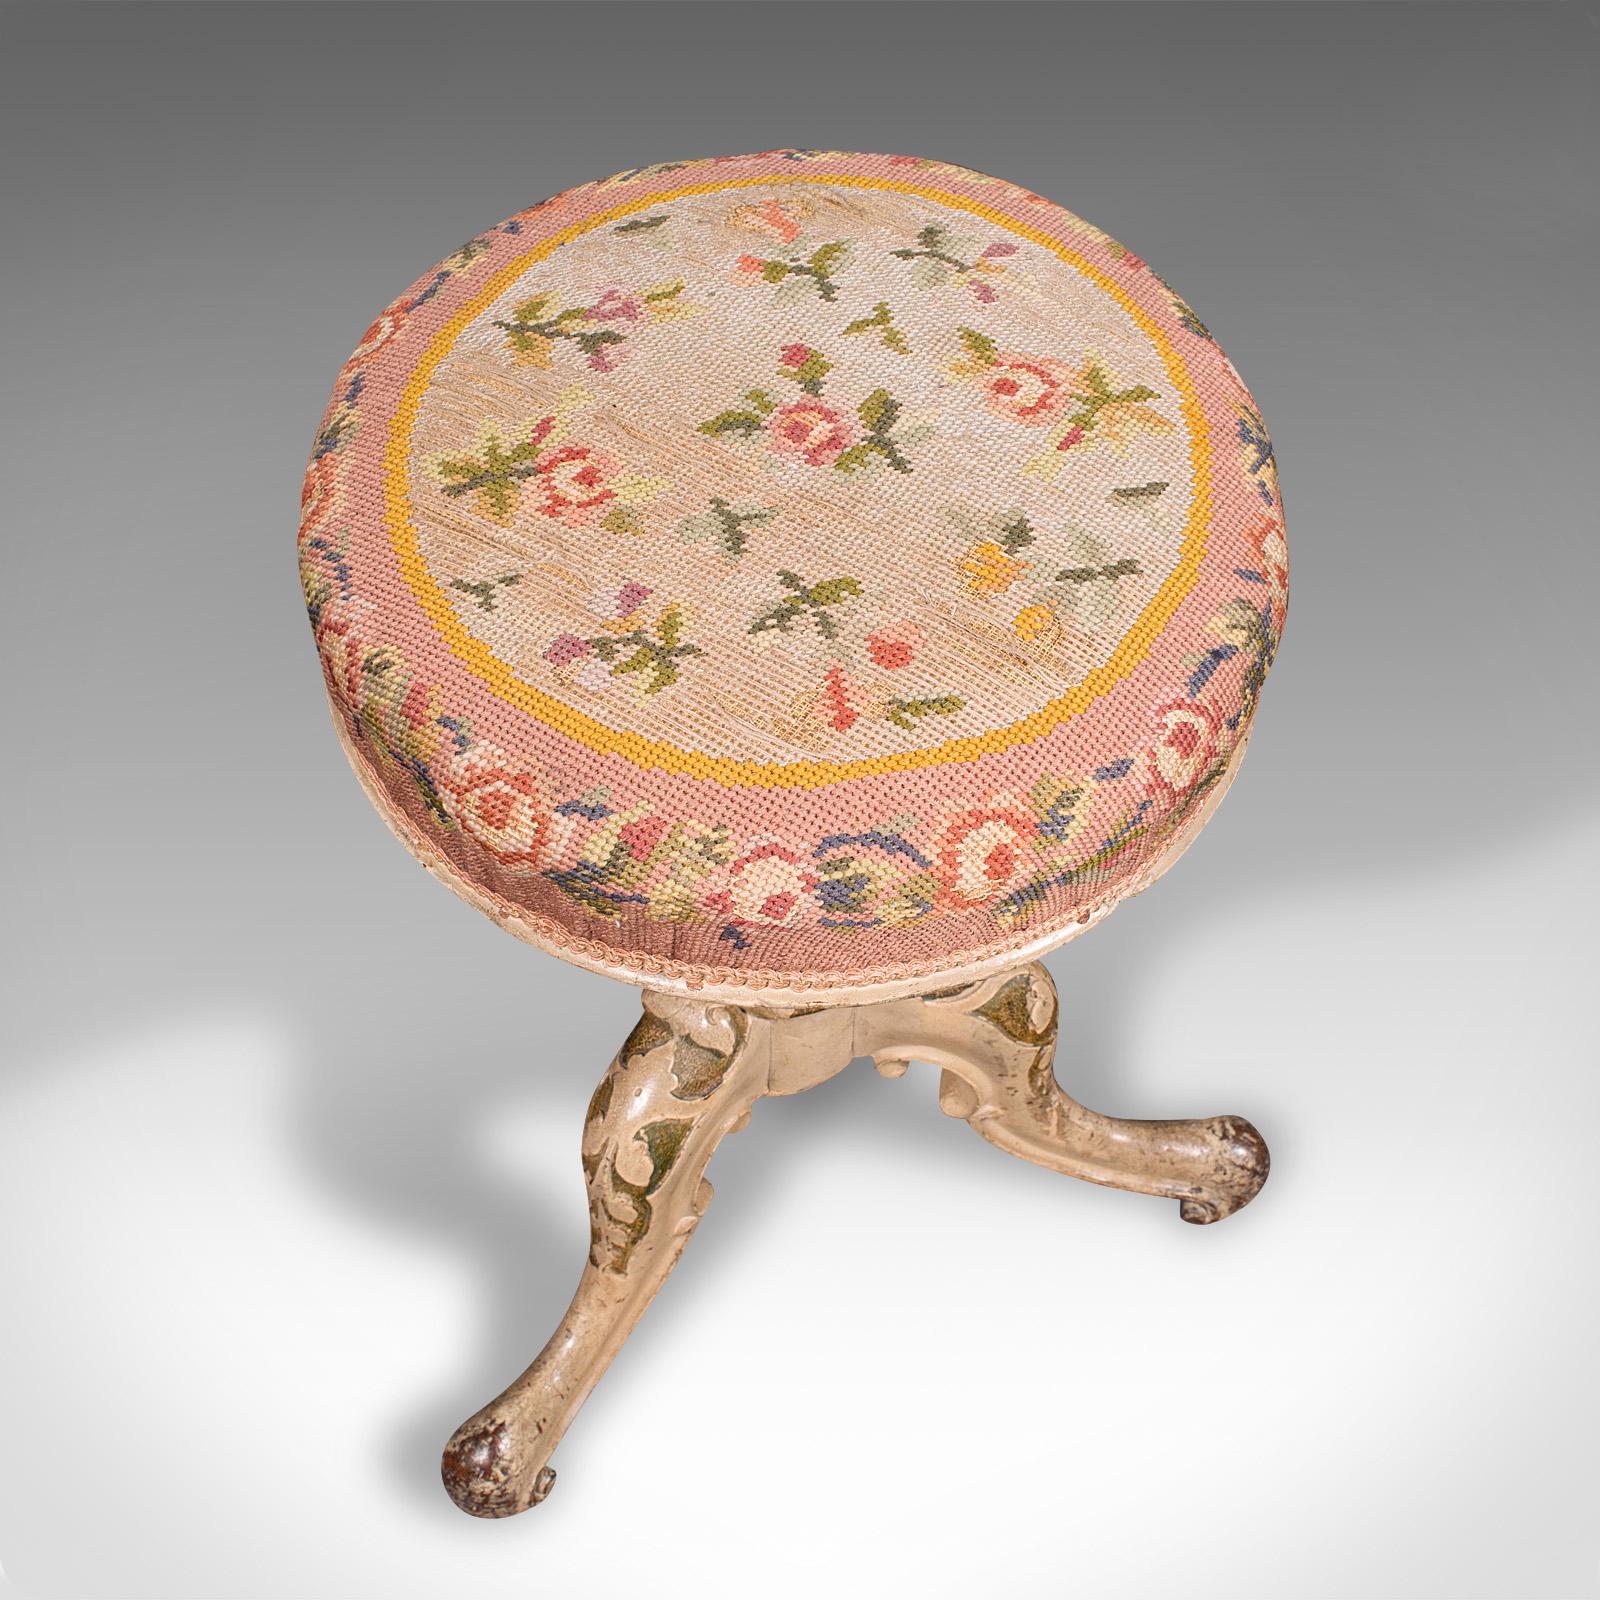 19th Century Antique Piano Stool, English, Painted Frame, Music Seat, Riser, Victorian, 1850